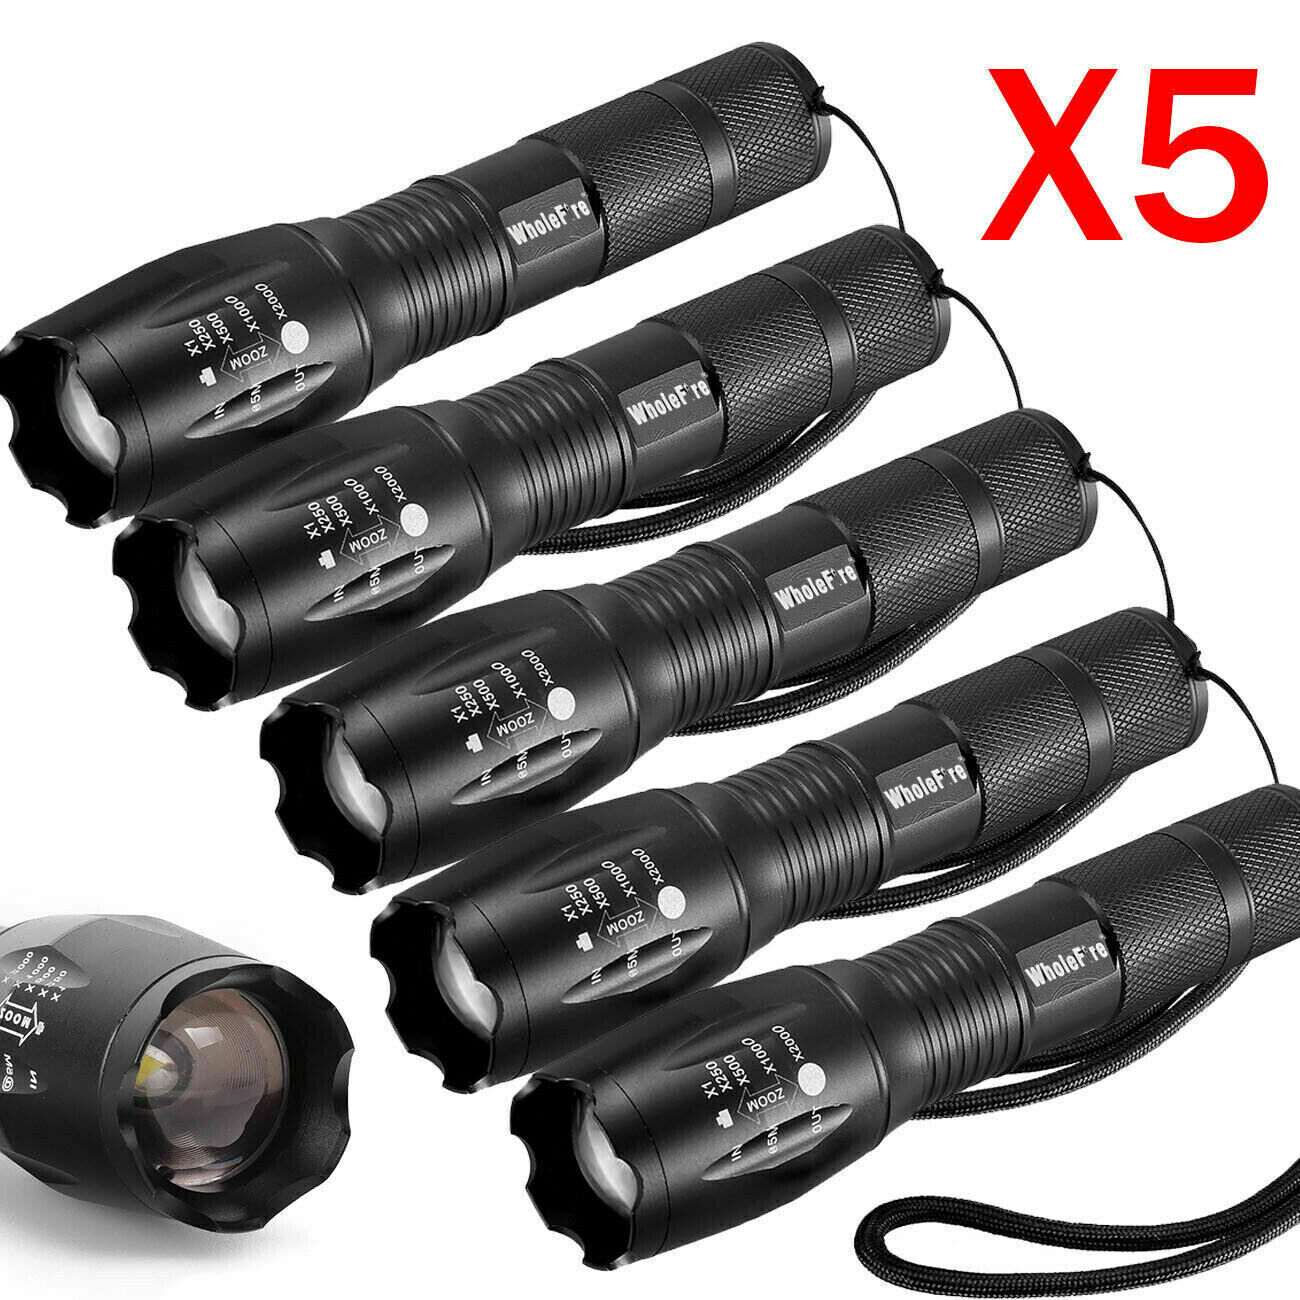 5X Tactical 18650 Flashlight LED High Powered 5 Modes Zoomable Aluminum Light Wholefire X800